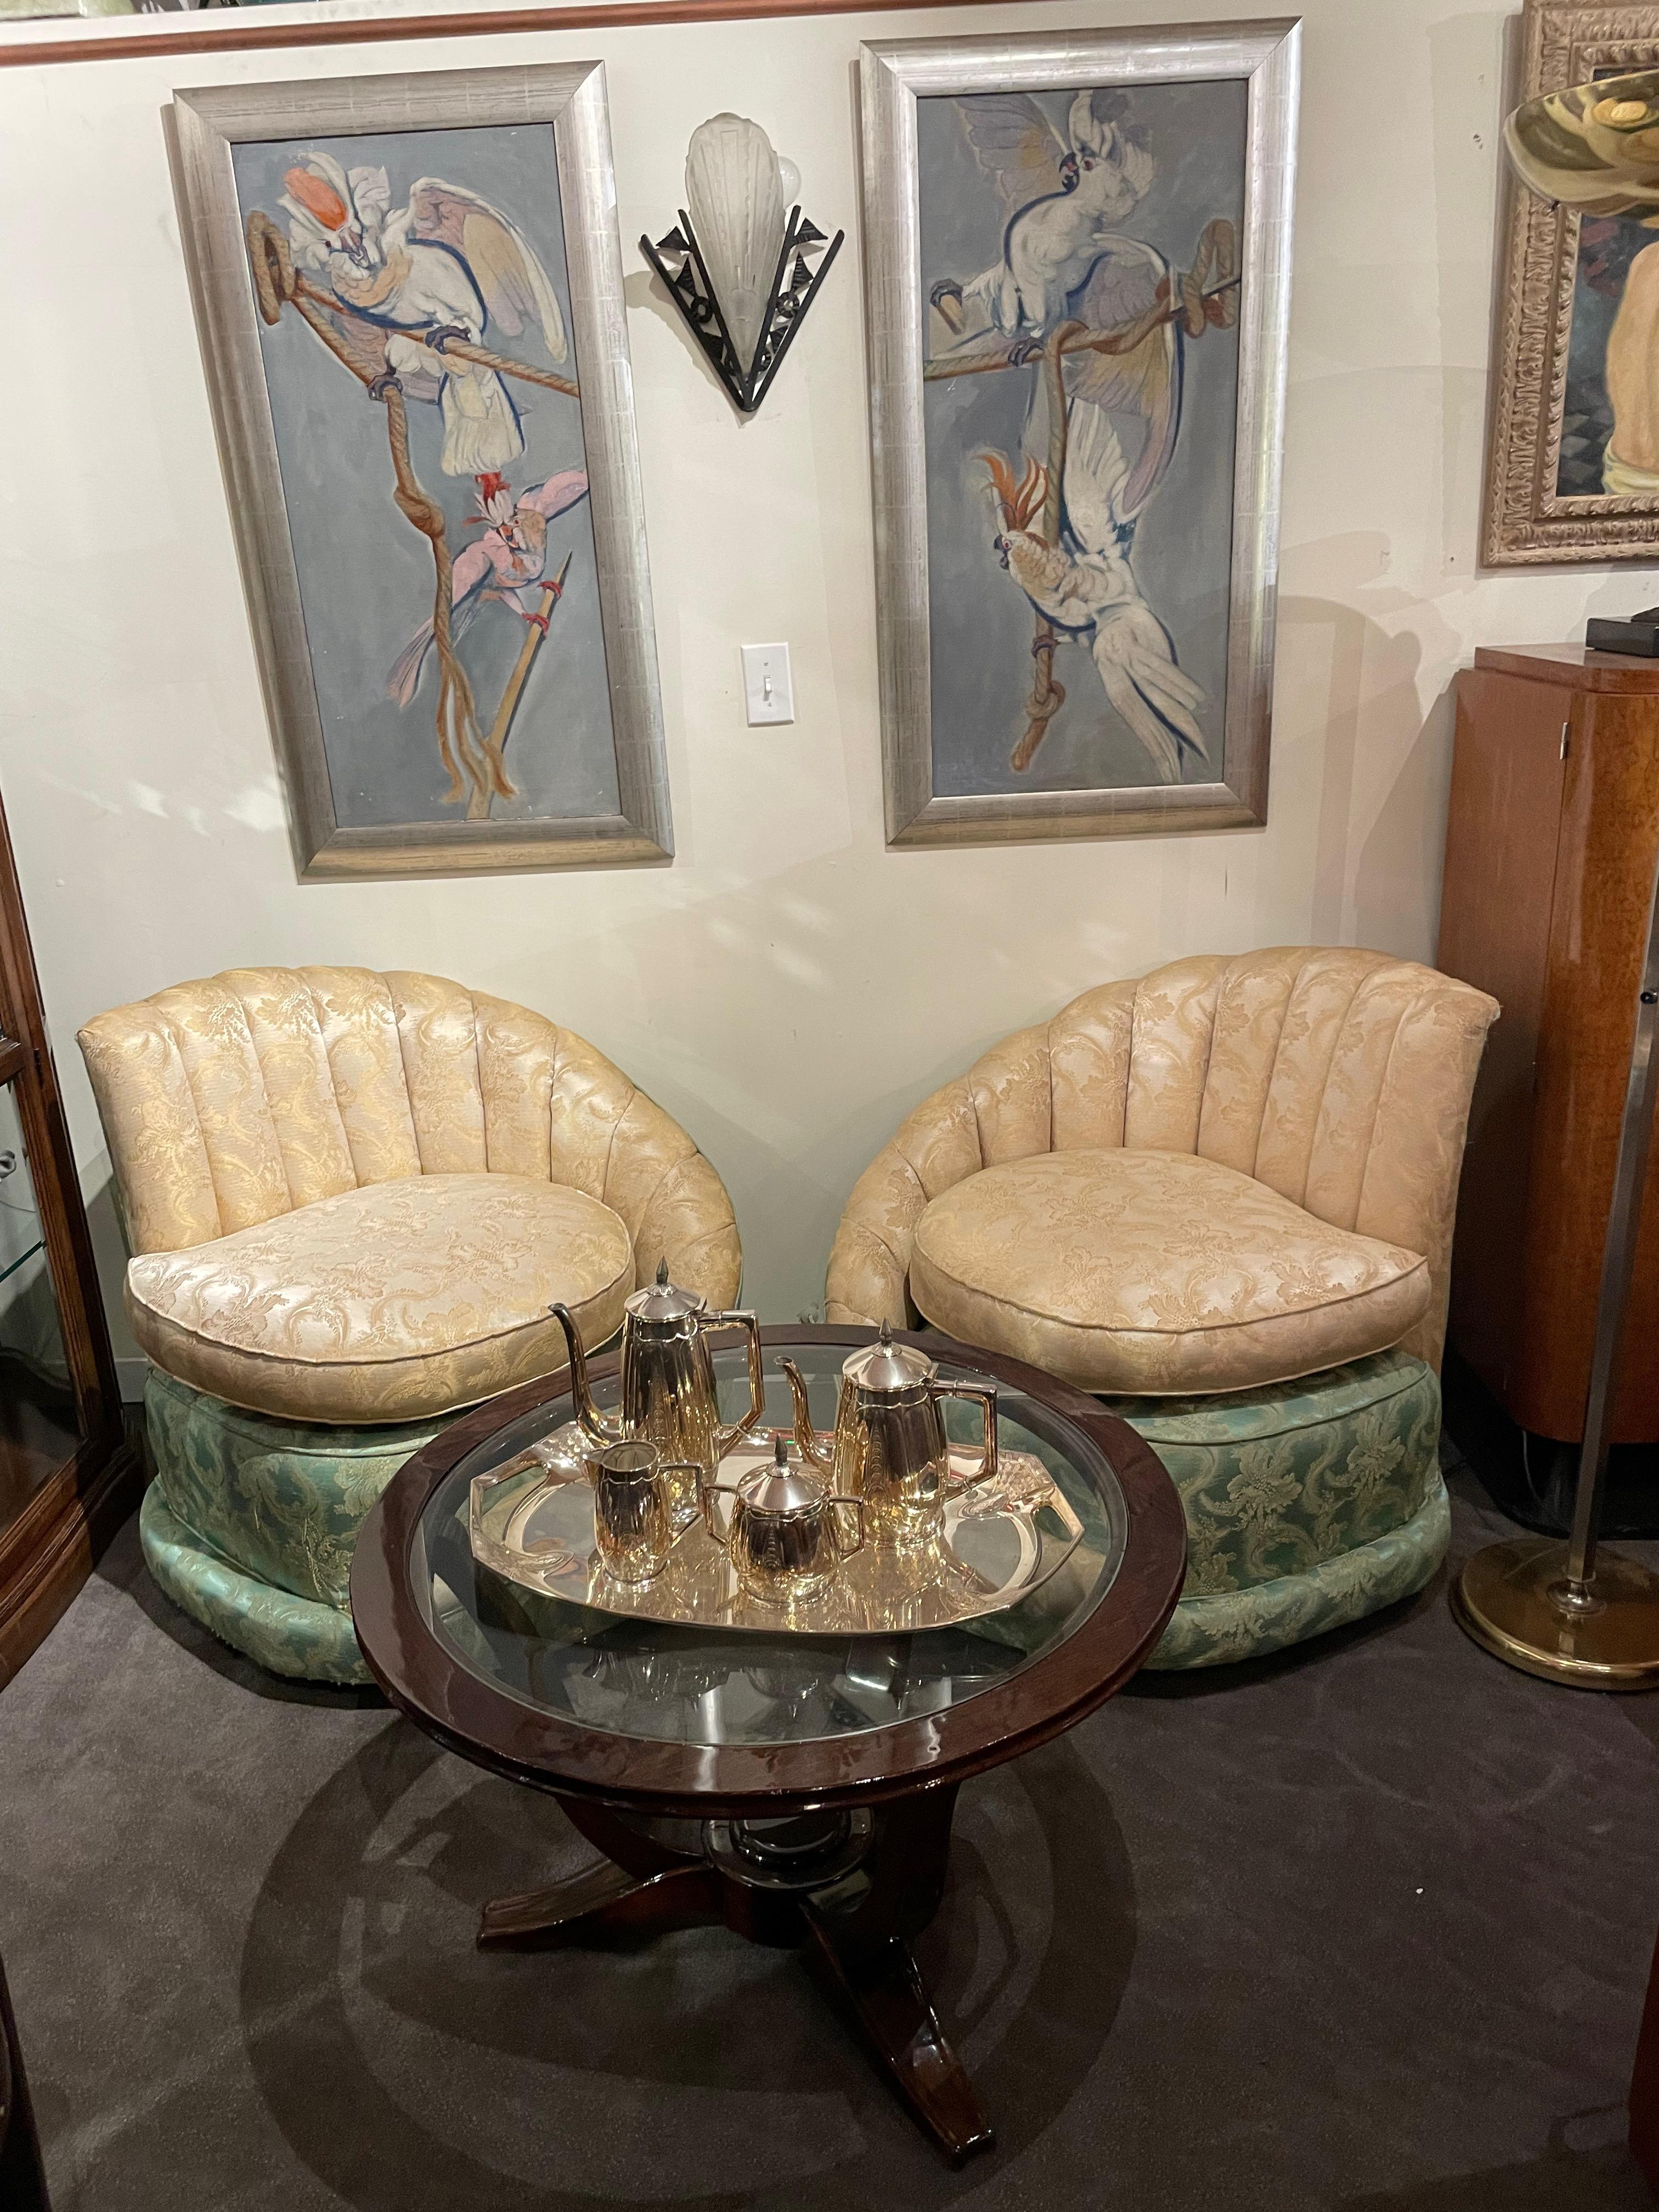 A pair of channel fan-backed chairs upholstered in brocade in a style that is a combination of Art Deco and Hollywood Regency. The cream and aqua brocade are the same pattern done in two colorways with a sweep of the cream that cascades from the